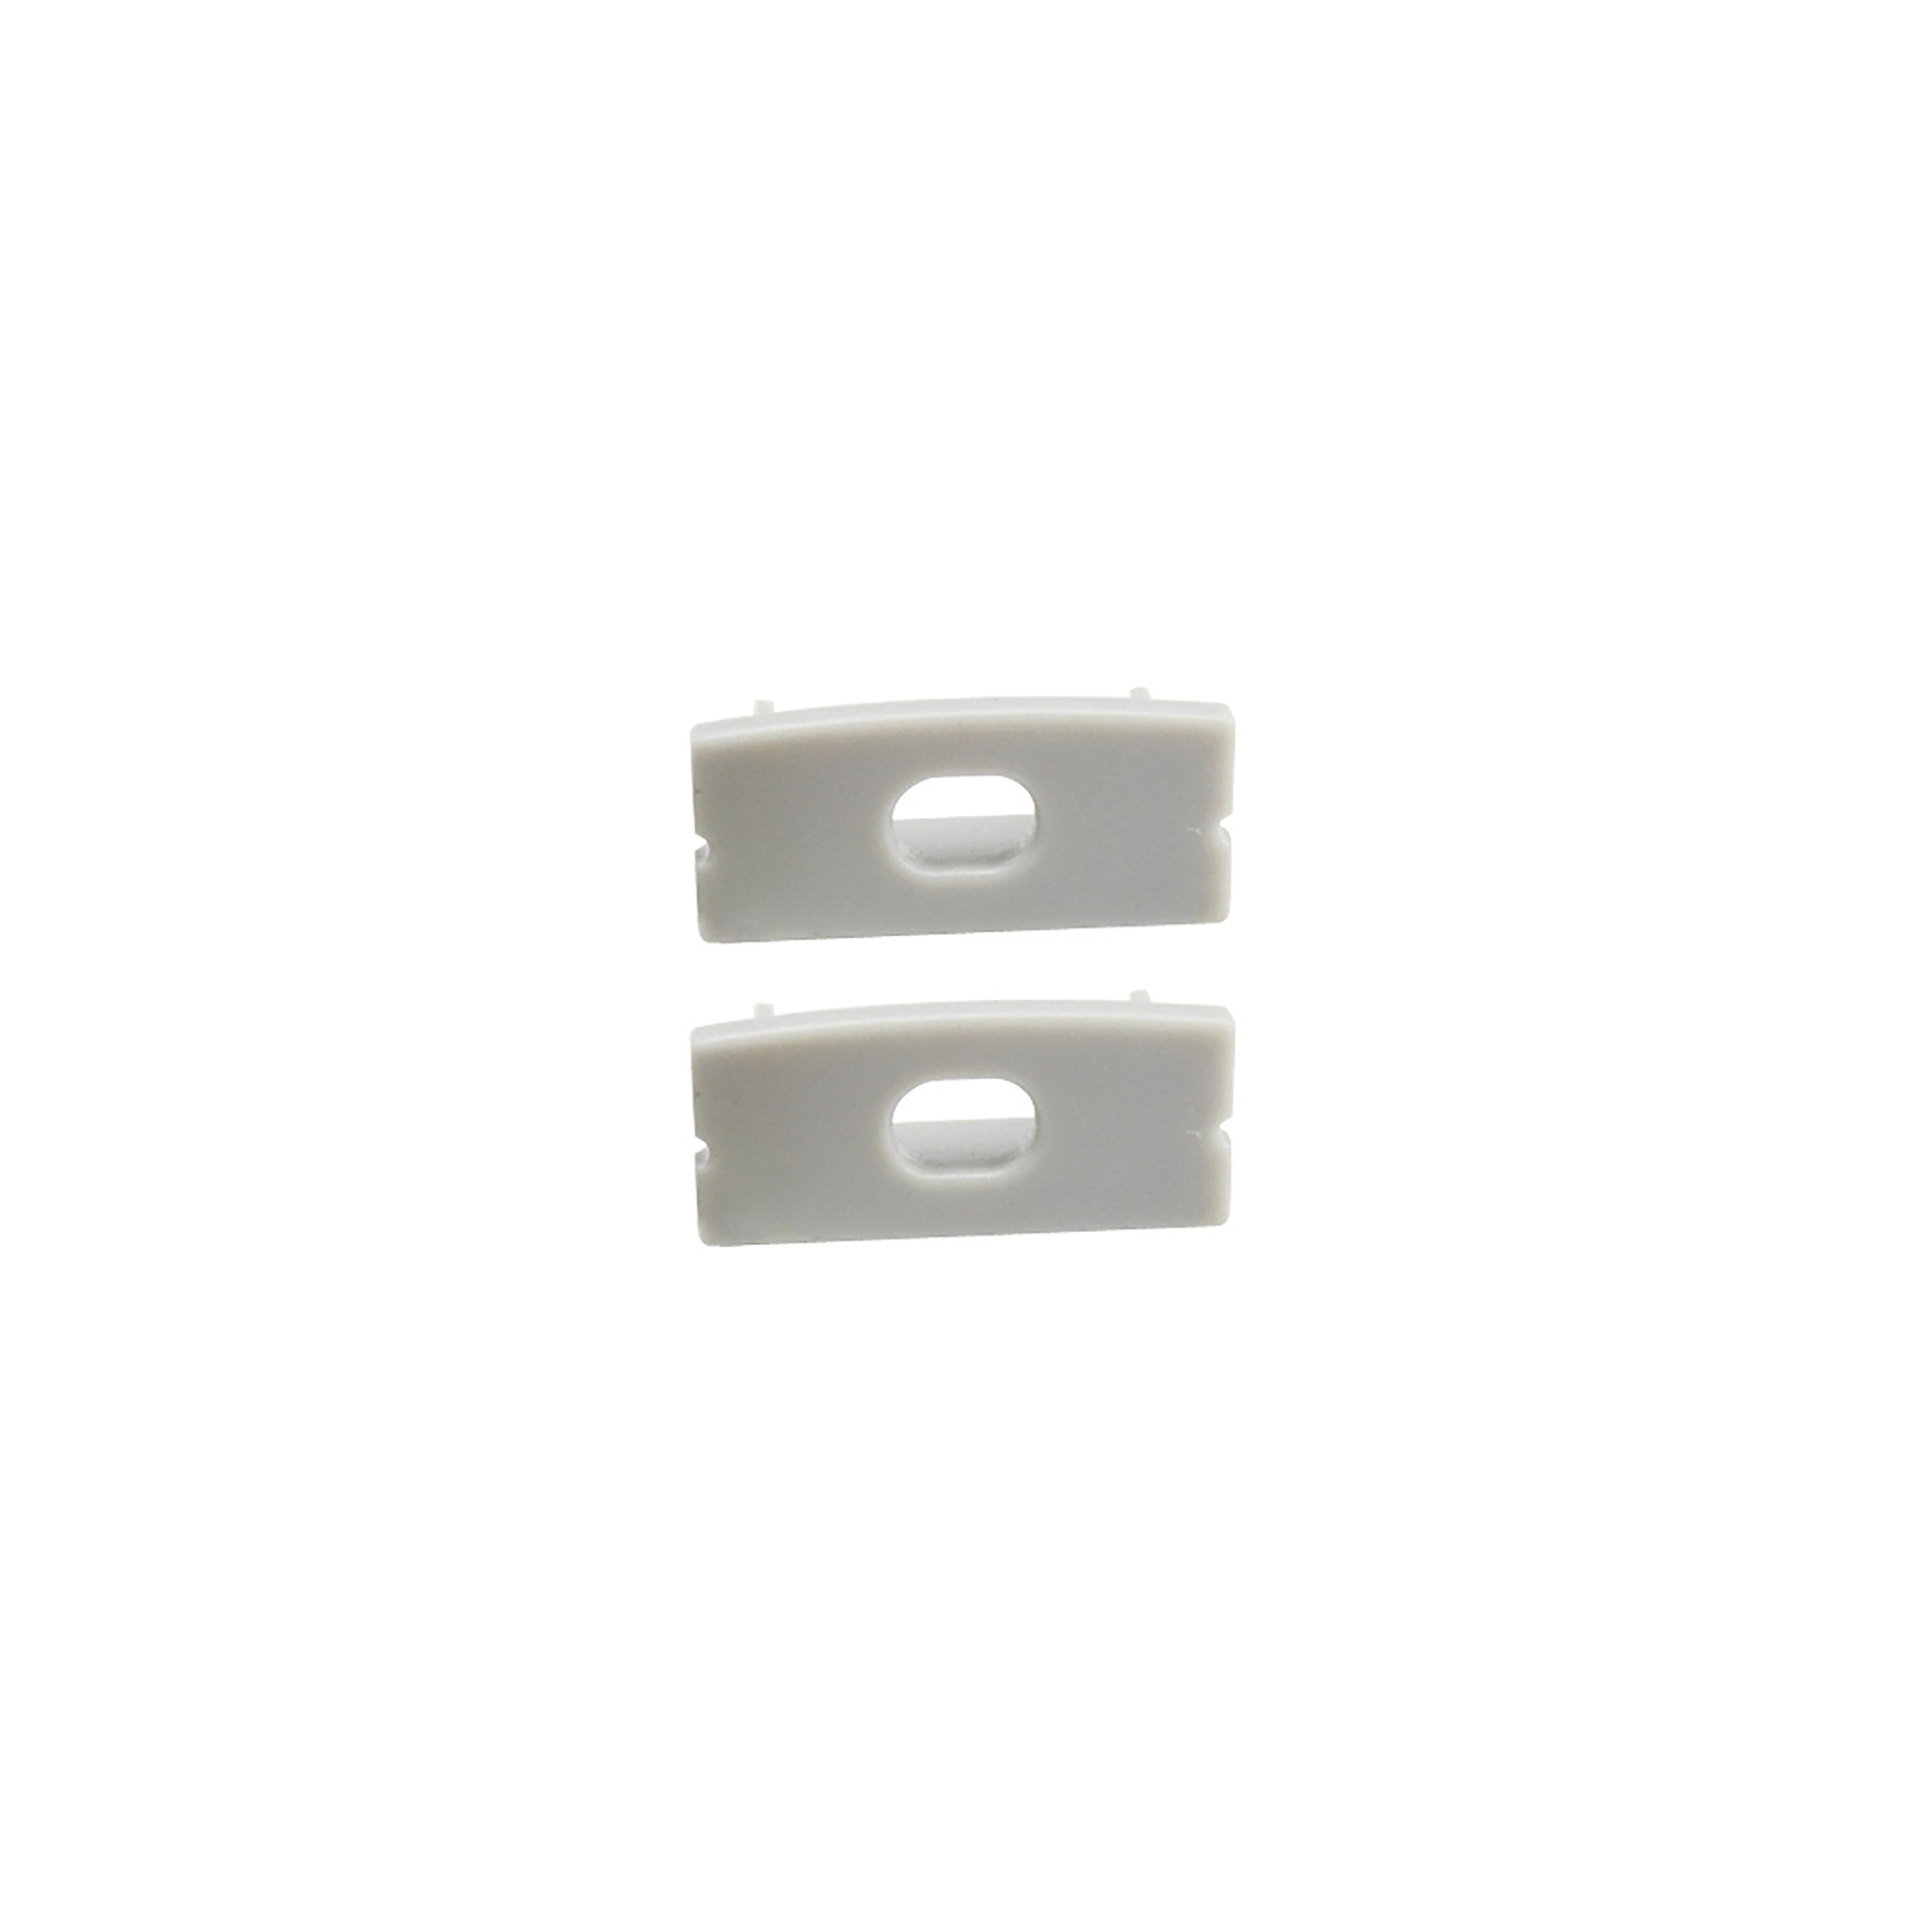 DA930145  Lin 2310; (4 pcs) Endcap With Hole For DA900044 23x10mm Suitable For Cable Entry